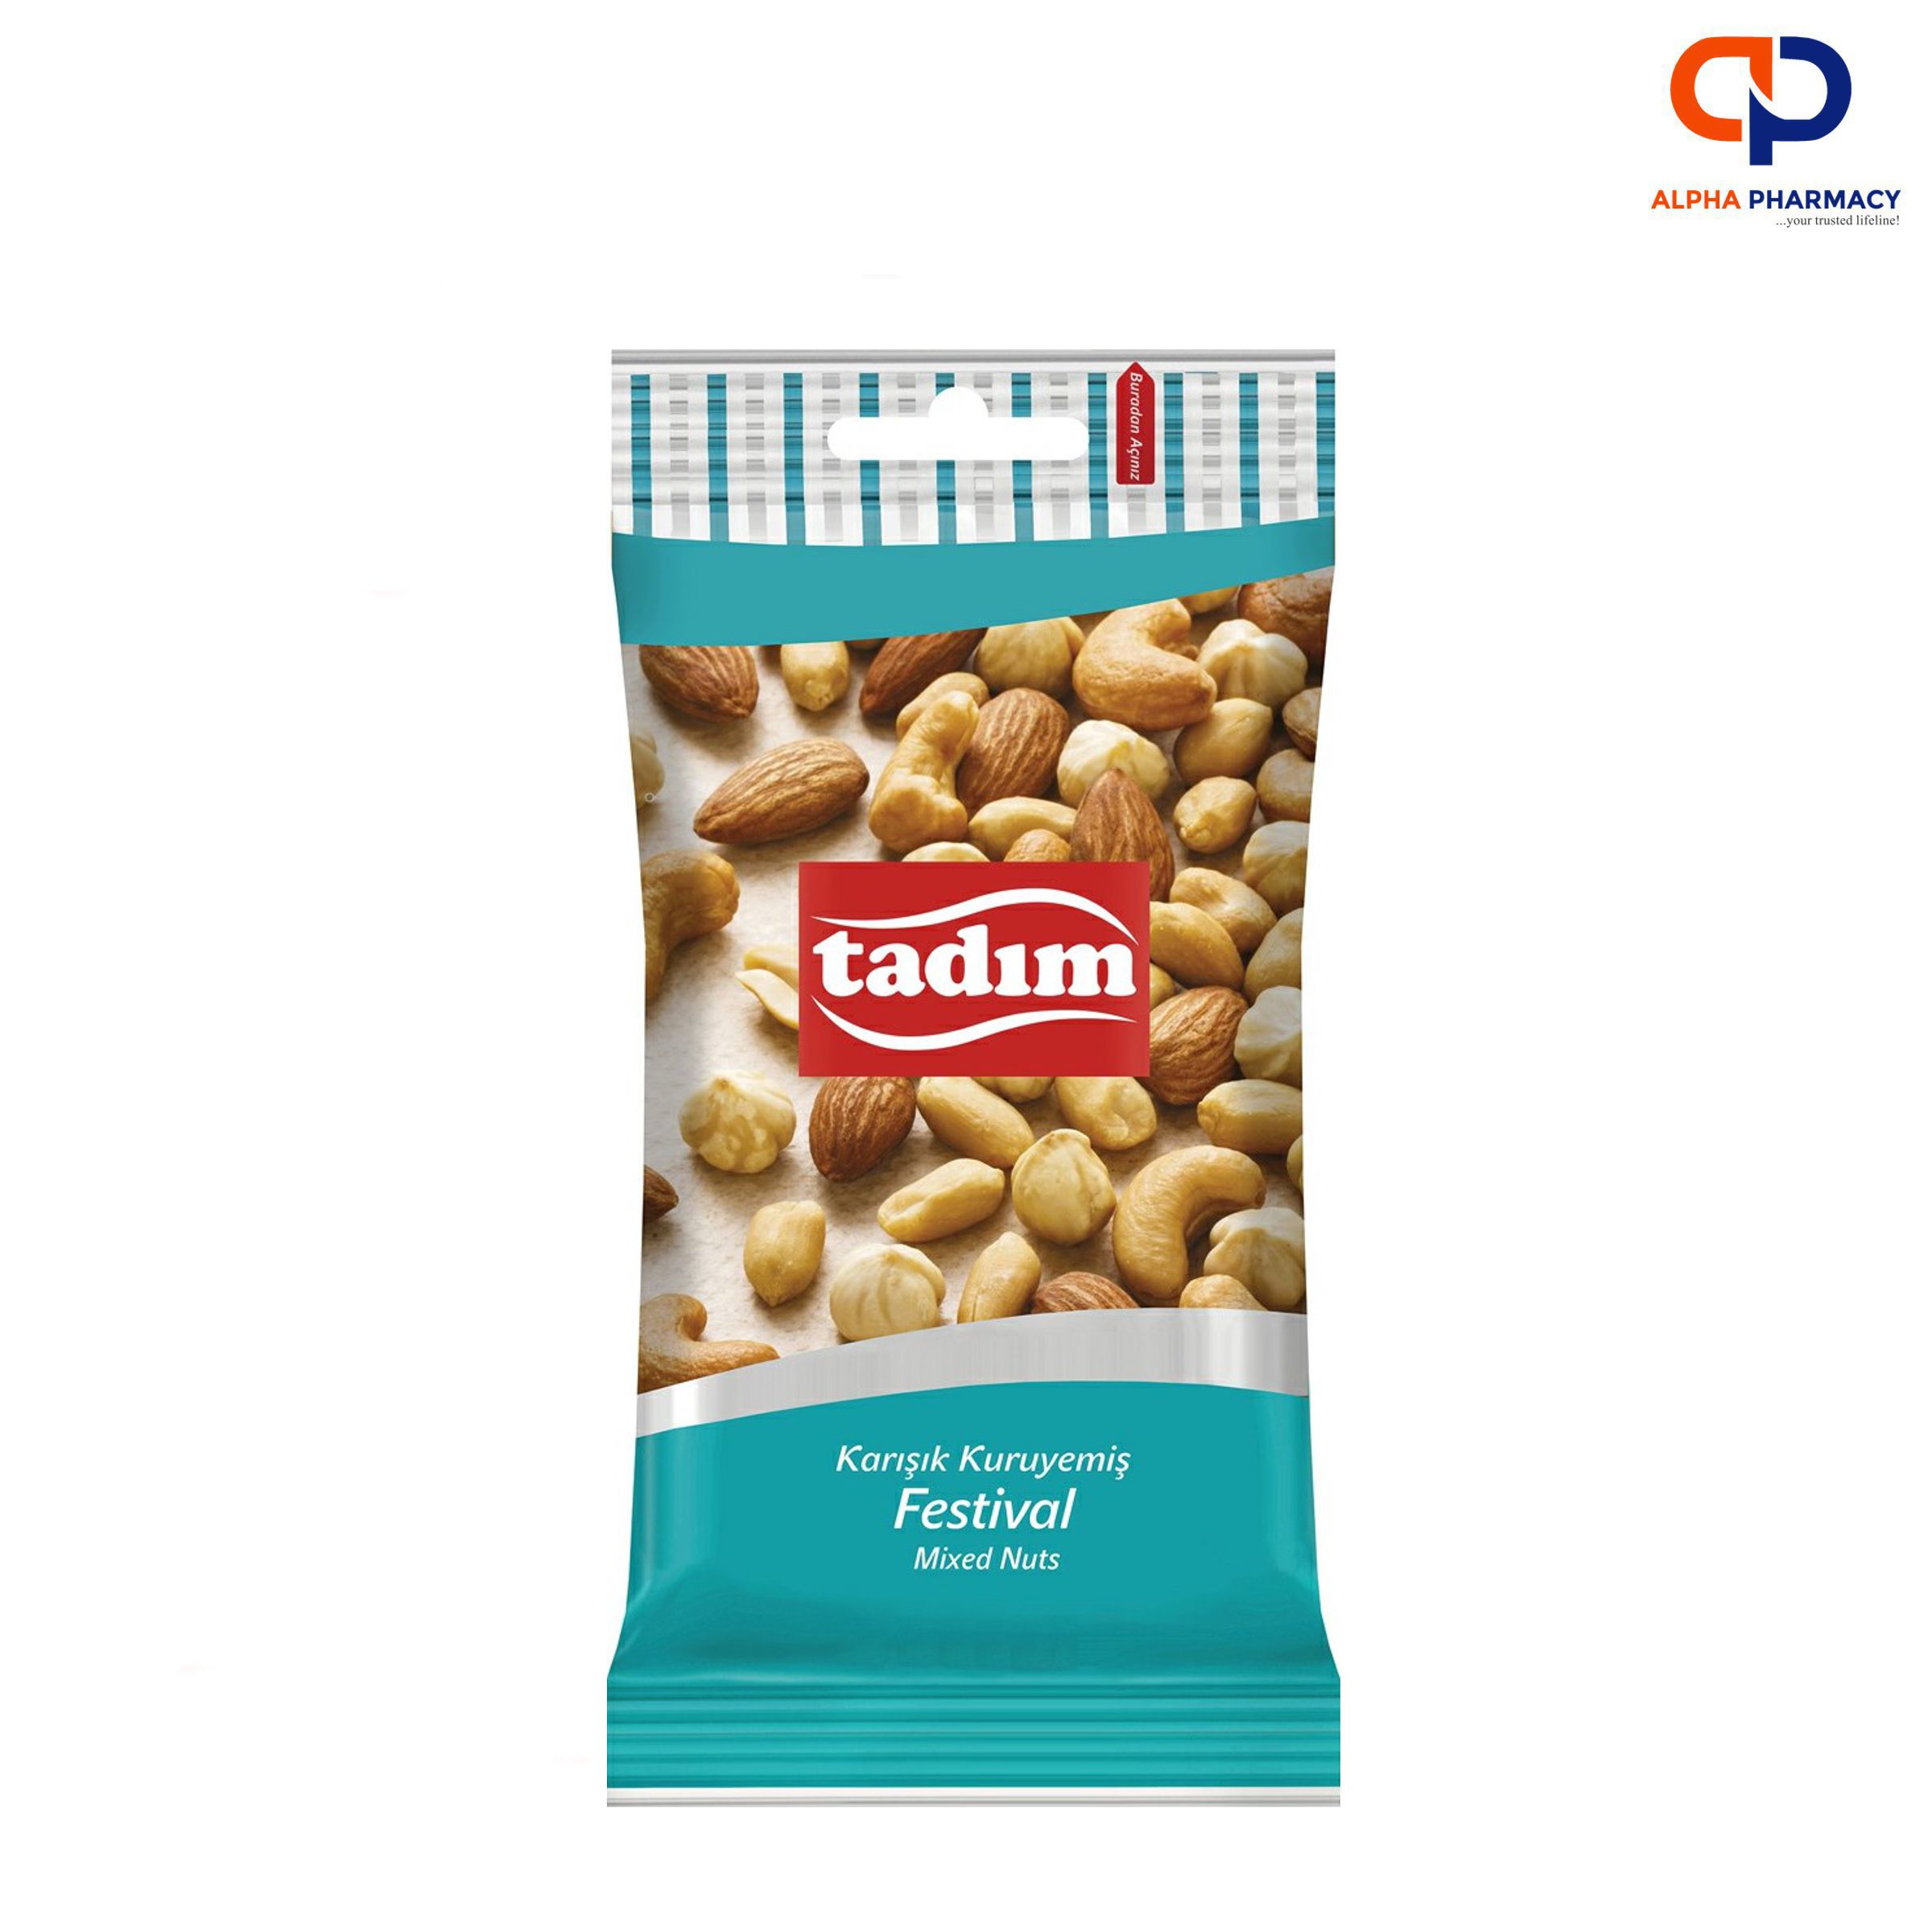 Tadim Roasted and Salted Mixed Nuts (Festival) 40g